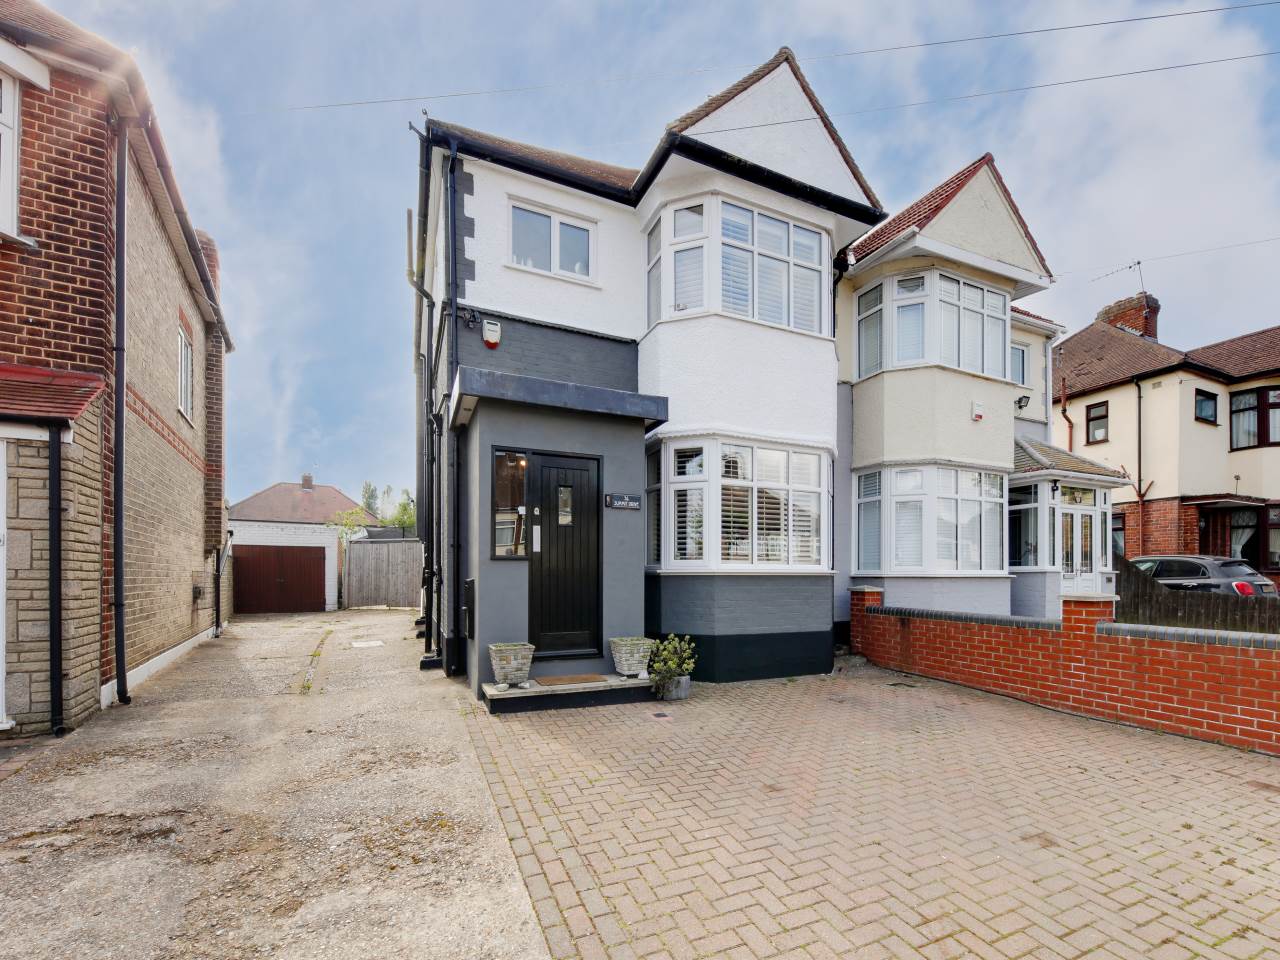 3 bed house for sale in Summit Drive, Woodford Green - Property Image 1